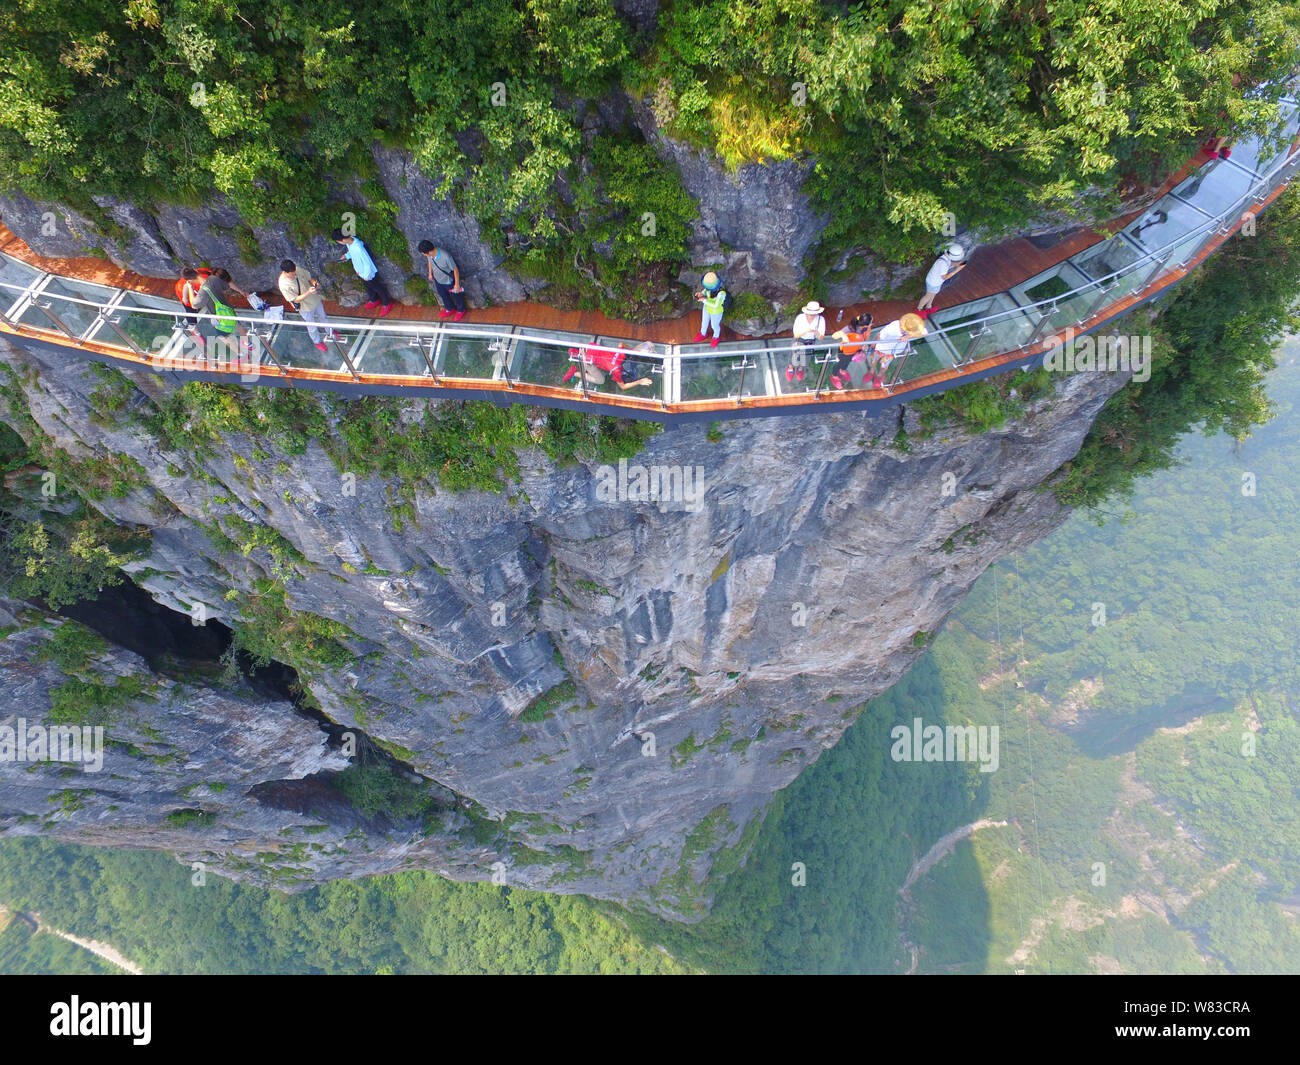 Aerial view of the 100-meter-long and 1.6-meter-wide glass skywalk on the cliff of Tianmen Mountain (or Tianmenshan Mountain) in Zhangjiajie National Stock Photo